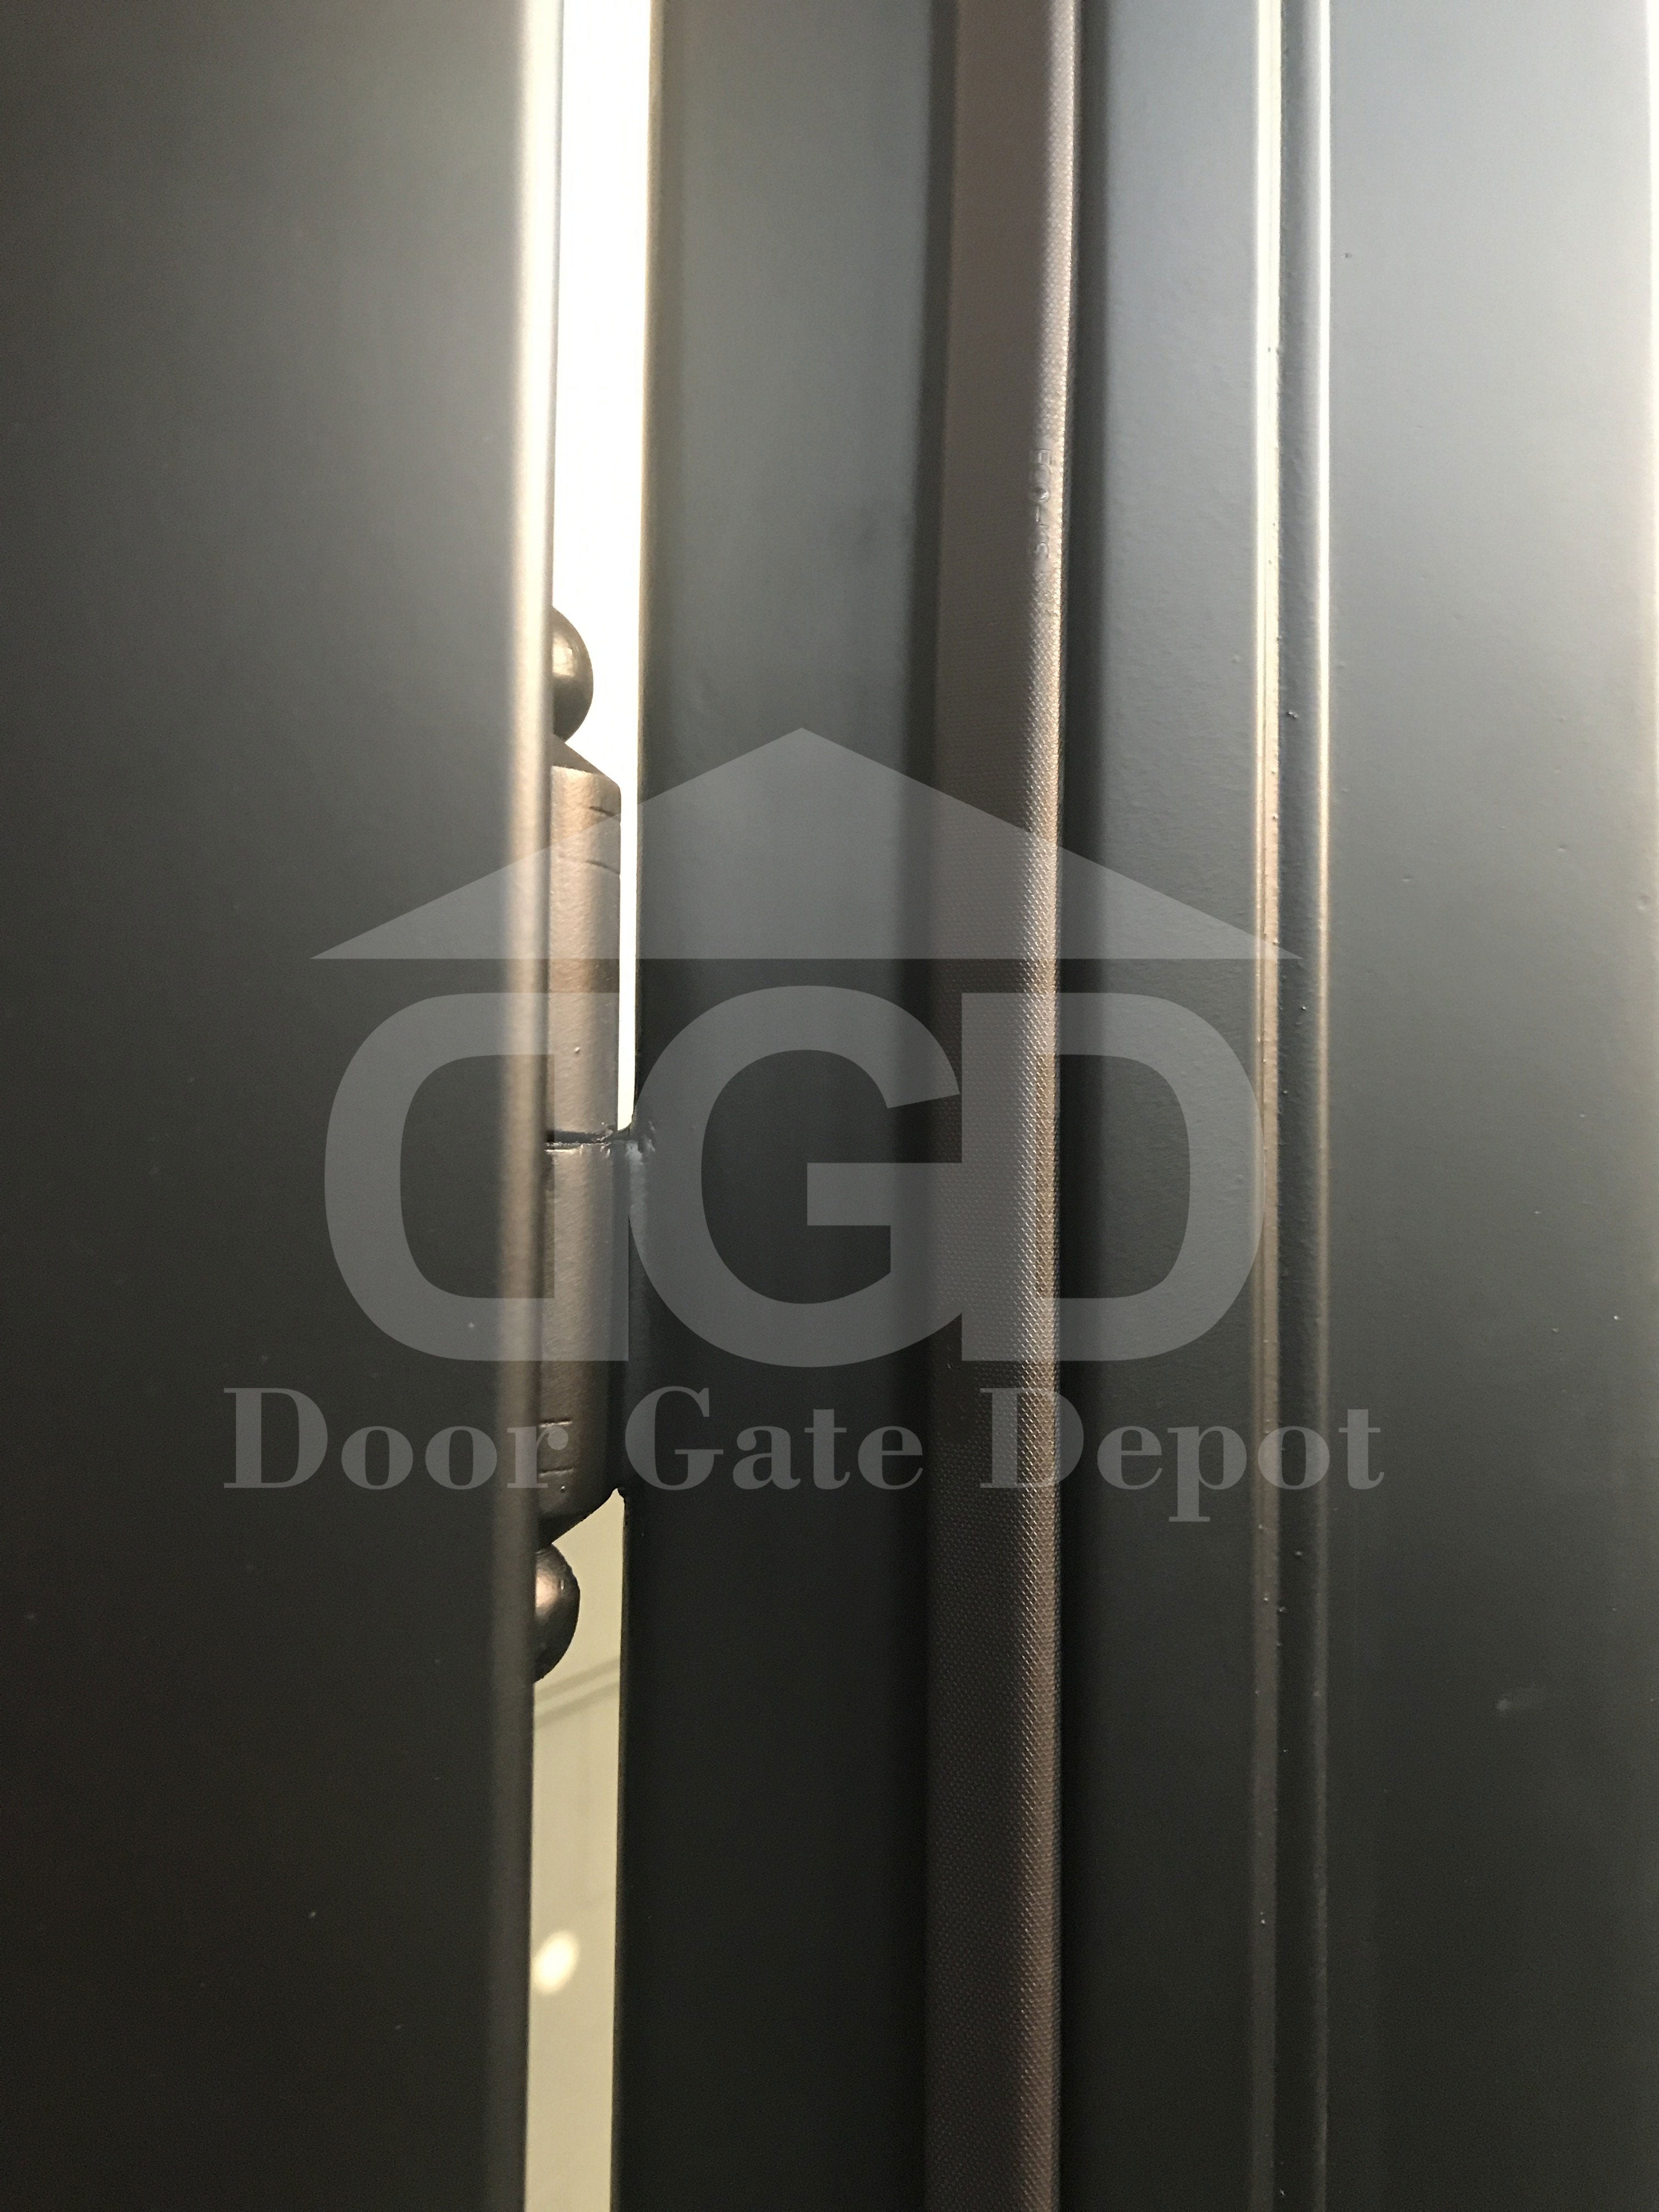 PLUM- modern double entry, wrought iron doors,removable bug screen -72x96 Right Hand - Door Gate Depot